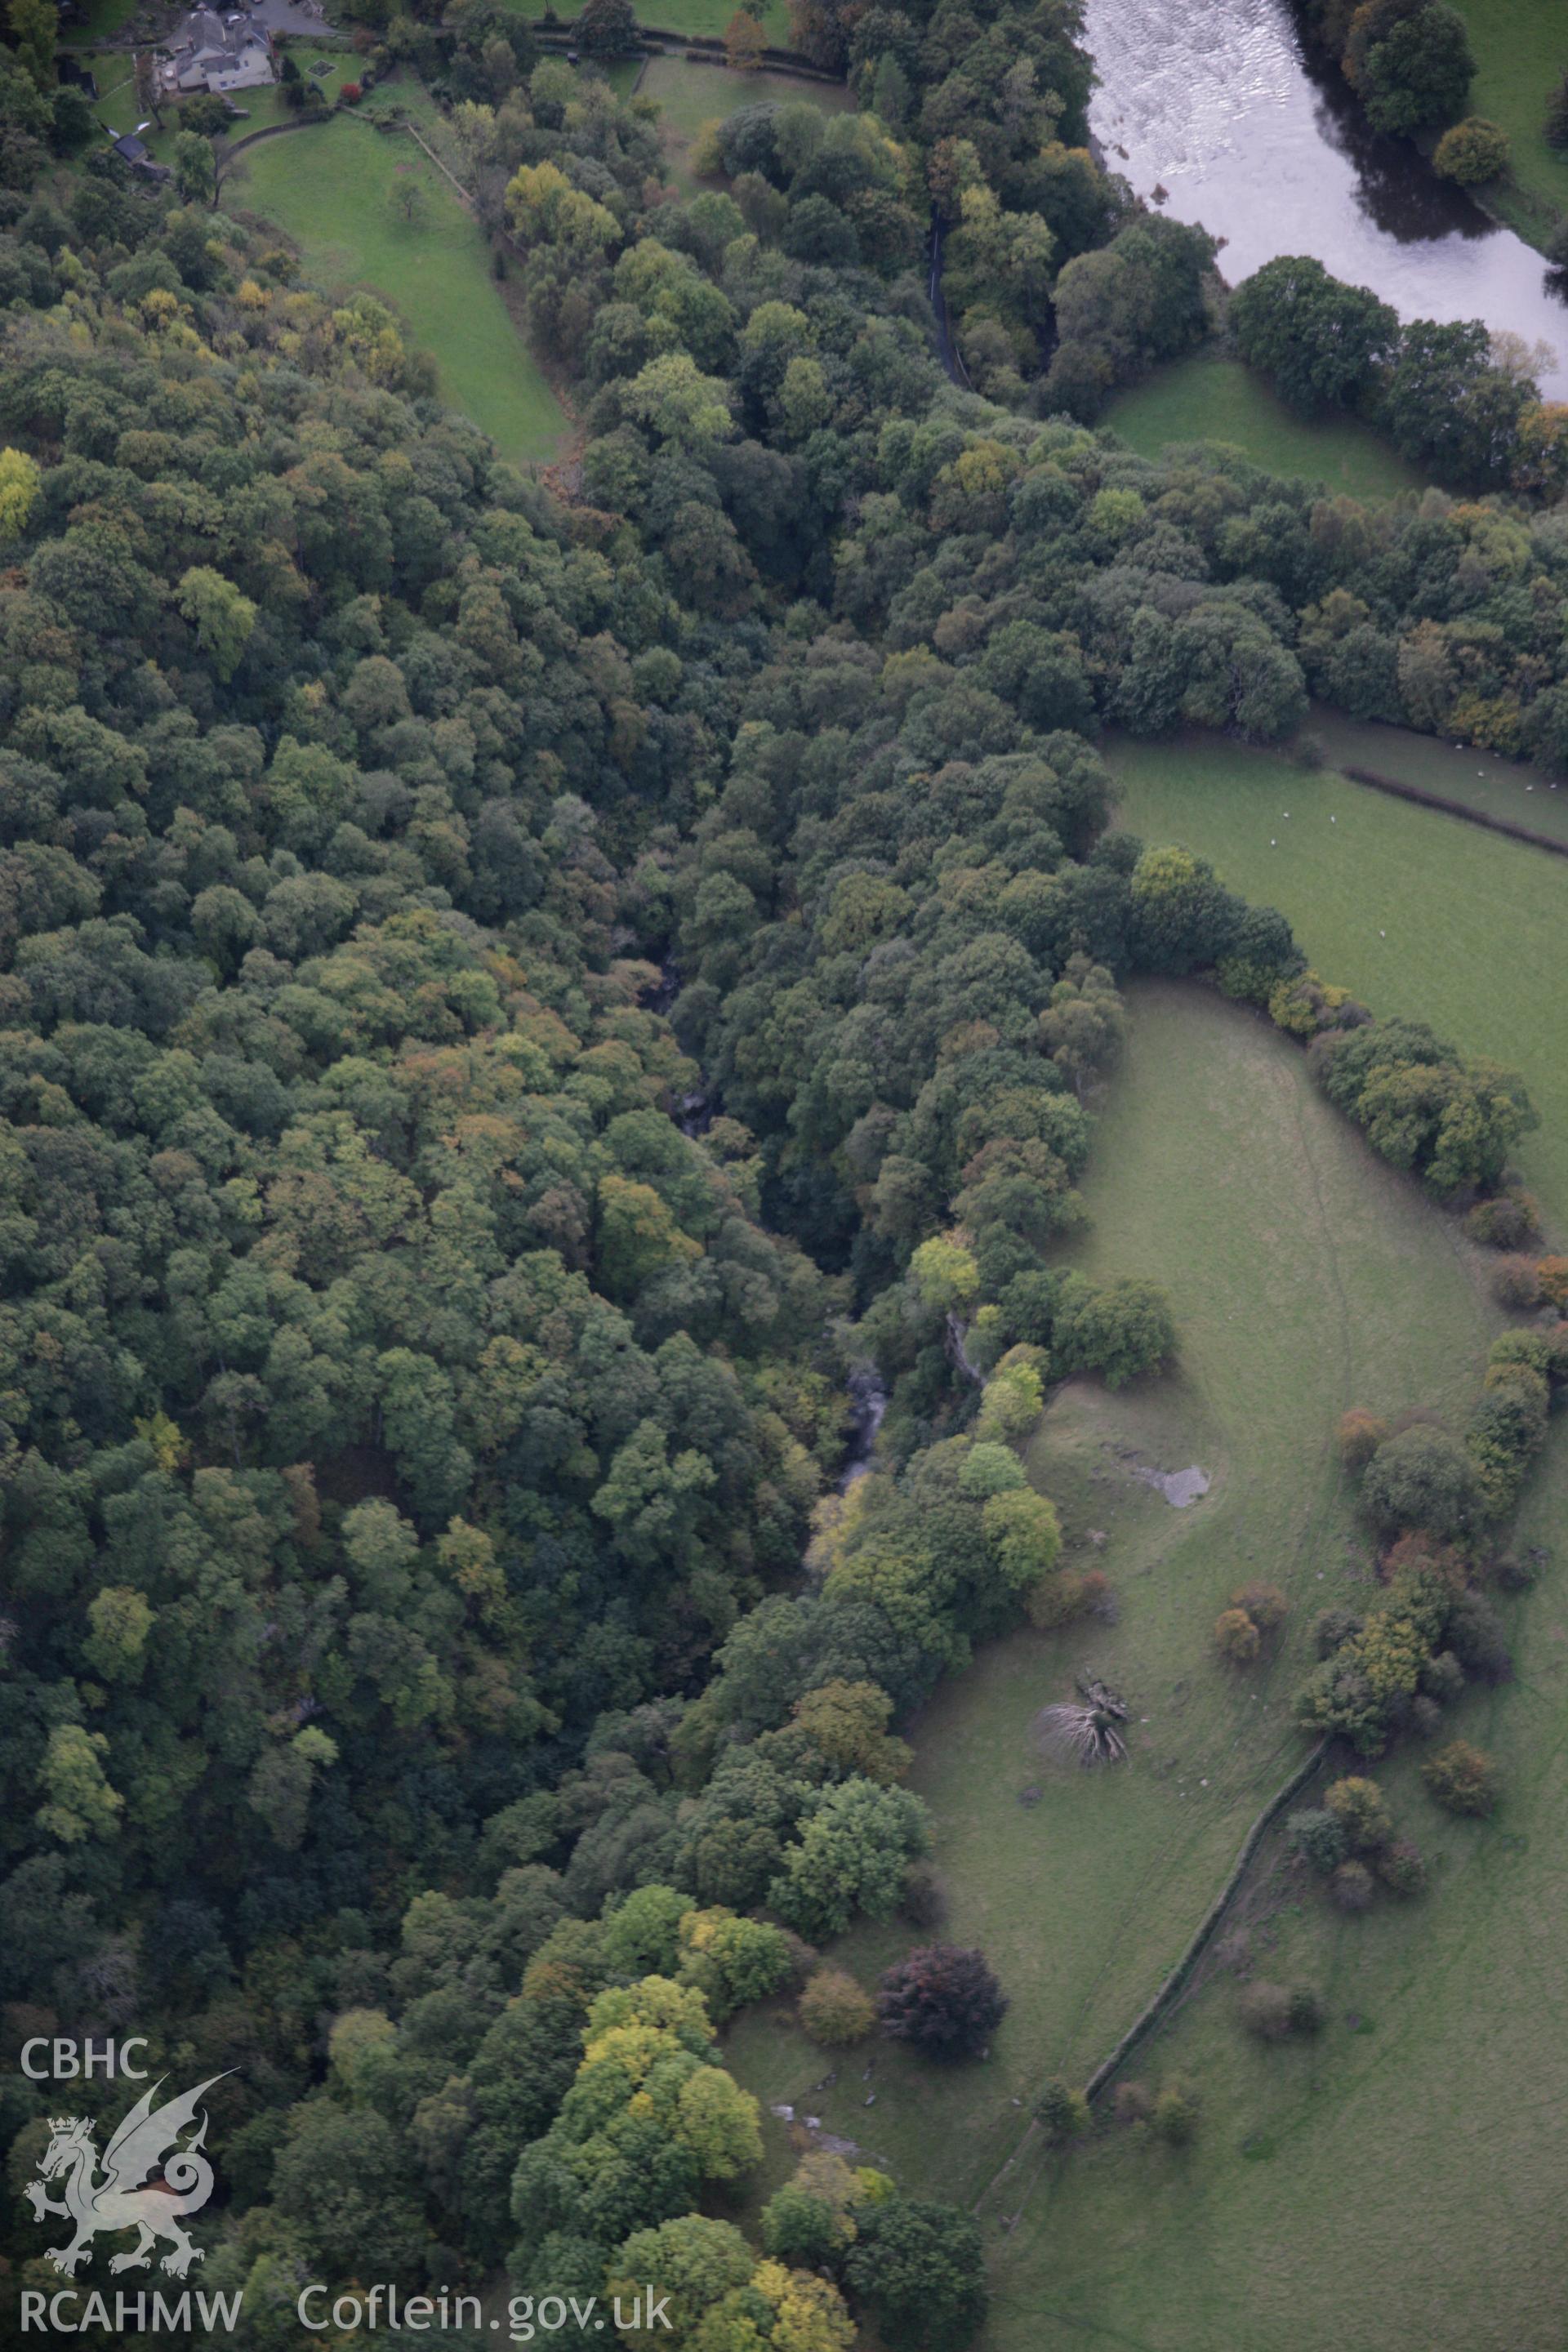 RCAHMW colour oblique aerial photograph of Aberedw Castle Mound viewed from the north-east. Taken on 13 October 2005 by Toby Driver